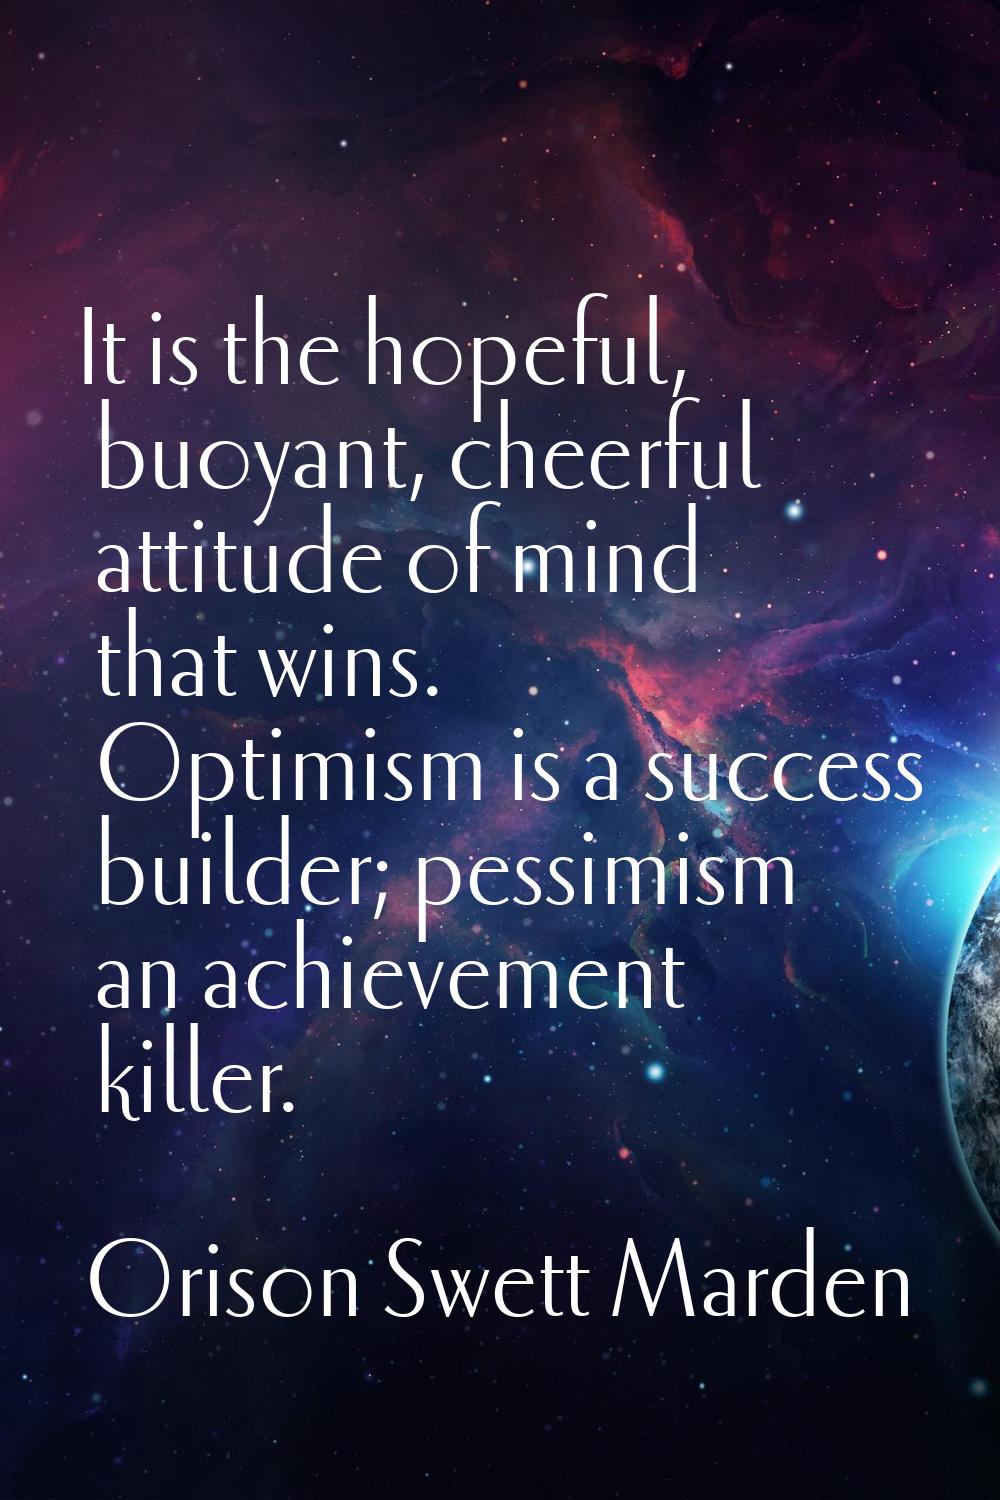 It is the hopeful, buoyant, cheerful attitude of mind that wins. Optimism is a success builder; pes